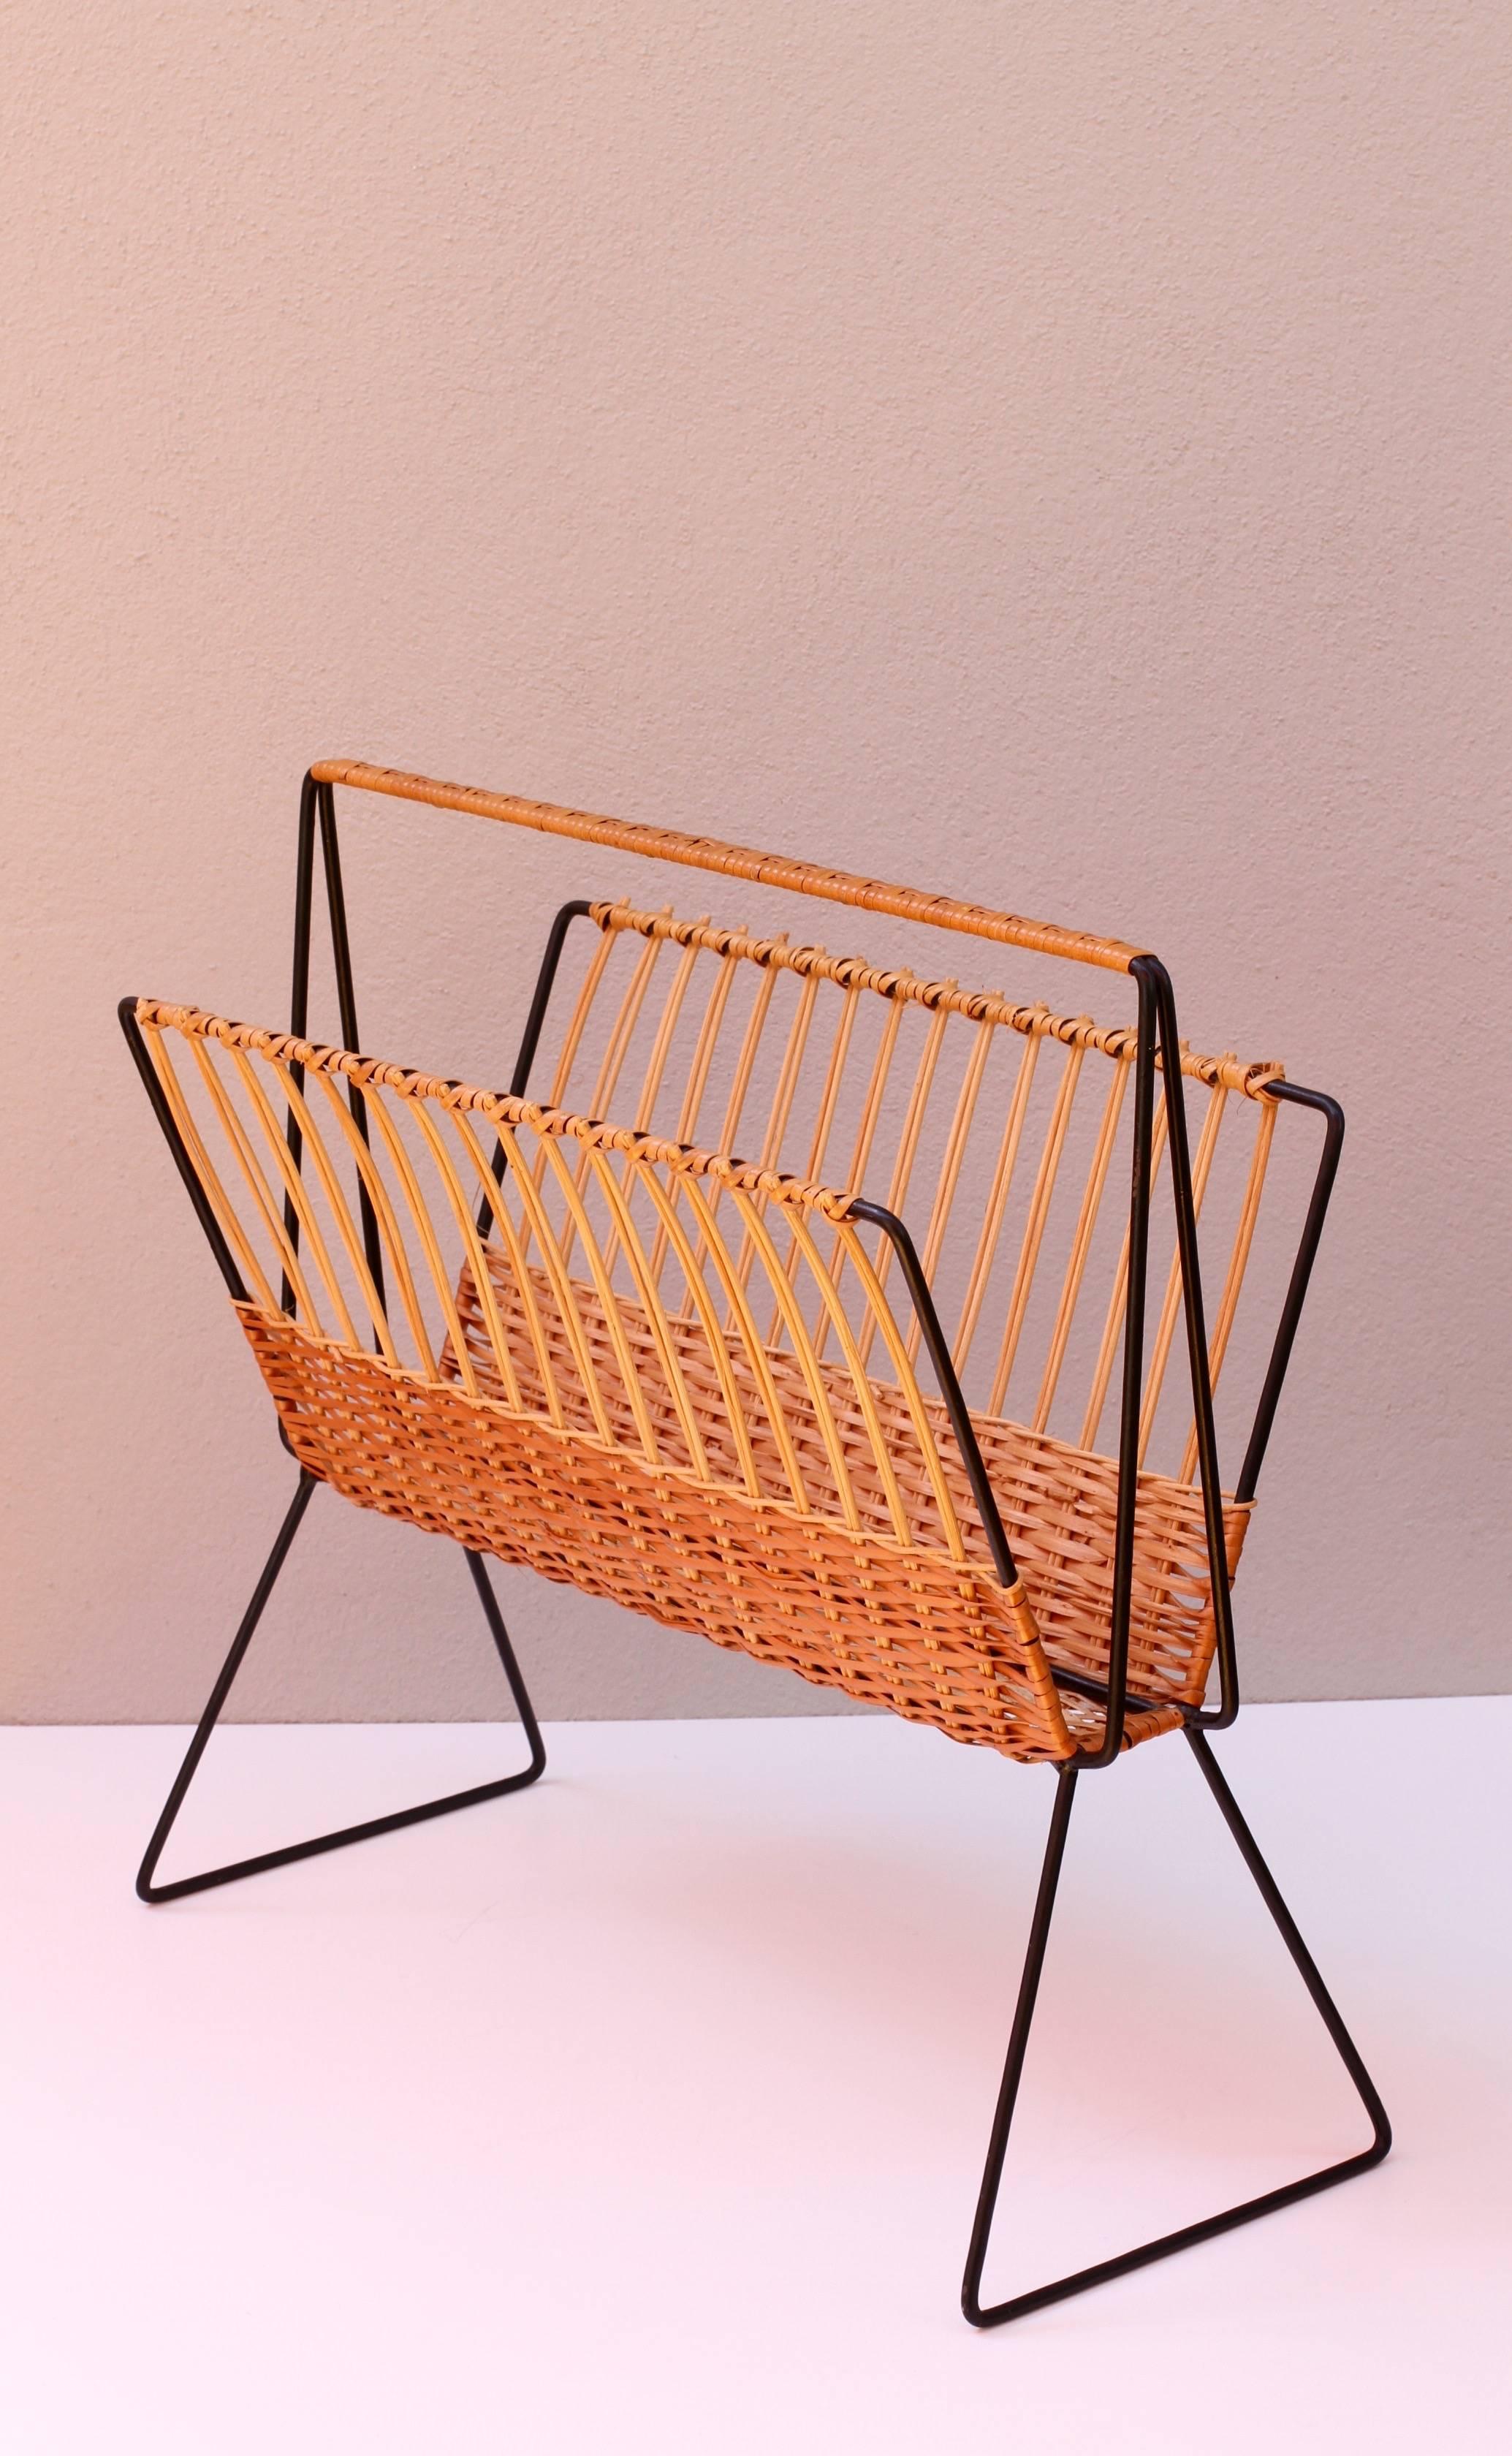 This large, oversized magazine stand or holder, in the style of Rohe Noordwolde, circa 1950s, features woven wicker / rattan strands which wrap around the black painted steel wire frame creating, what is, a wonderfully minimal, modernist piece of